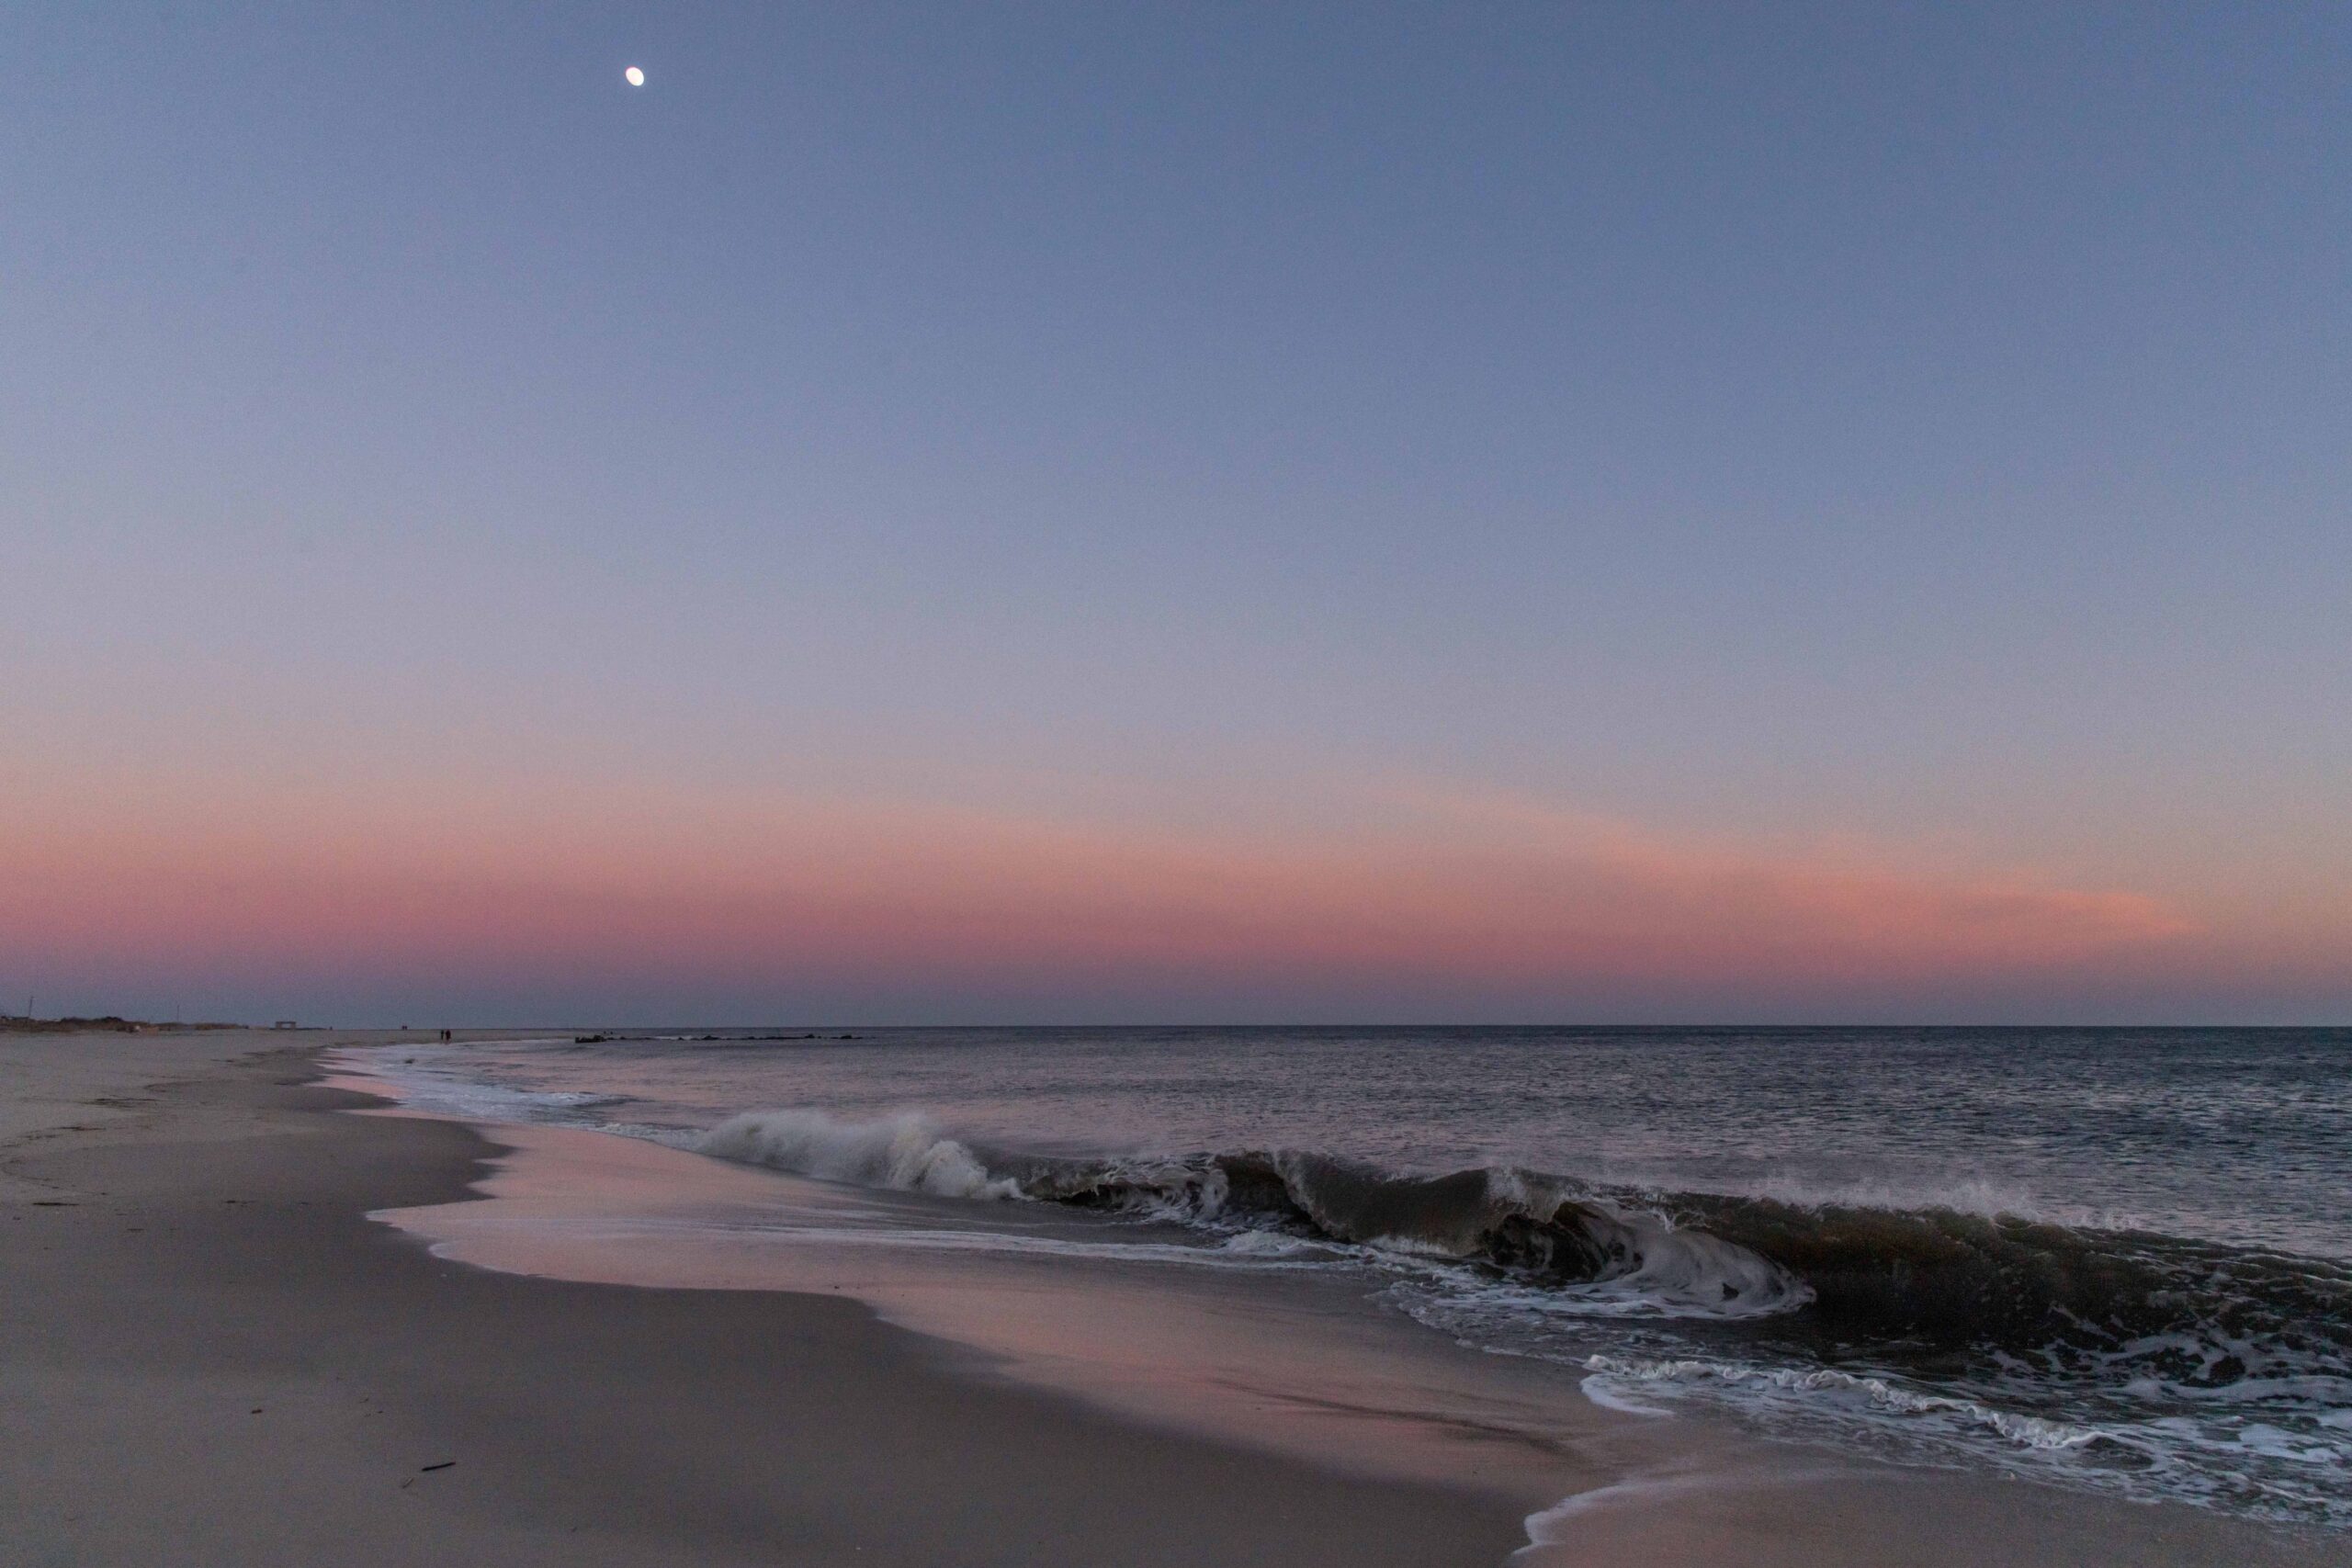 A moon in the sky in a clear sky over the ocean and beach with a wave crashing and pink colors at the horizon